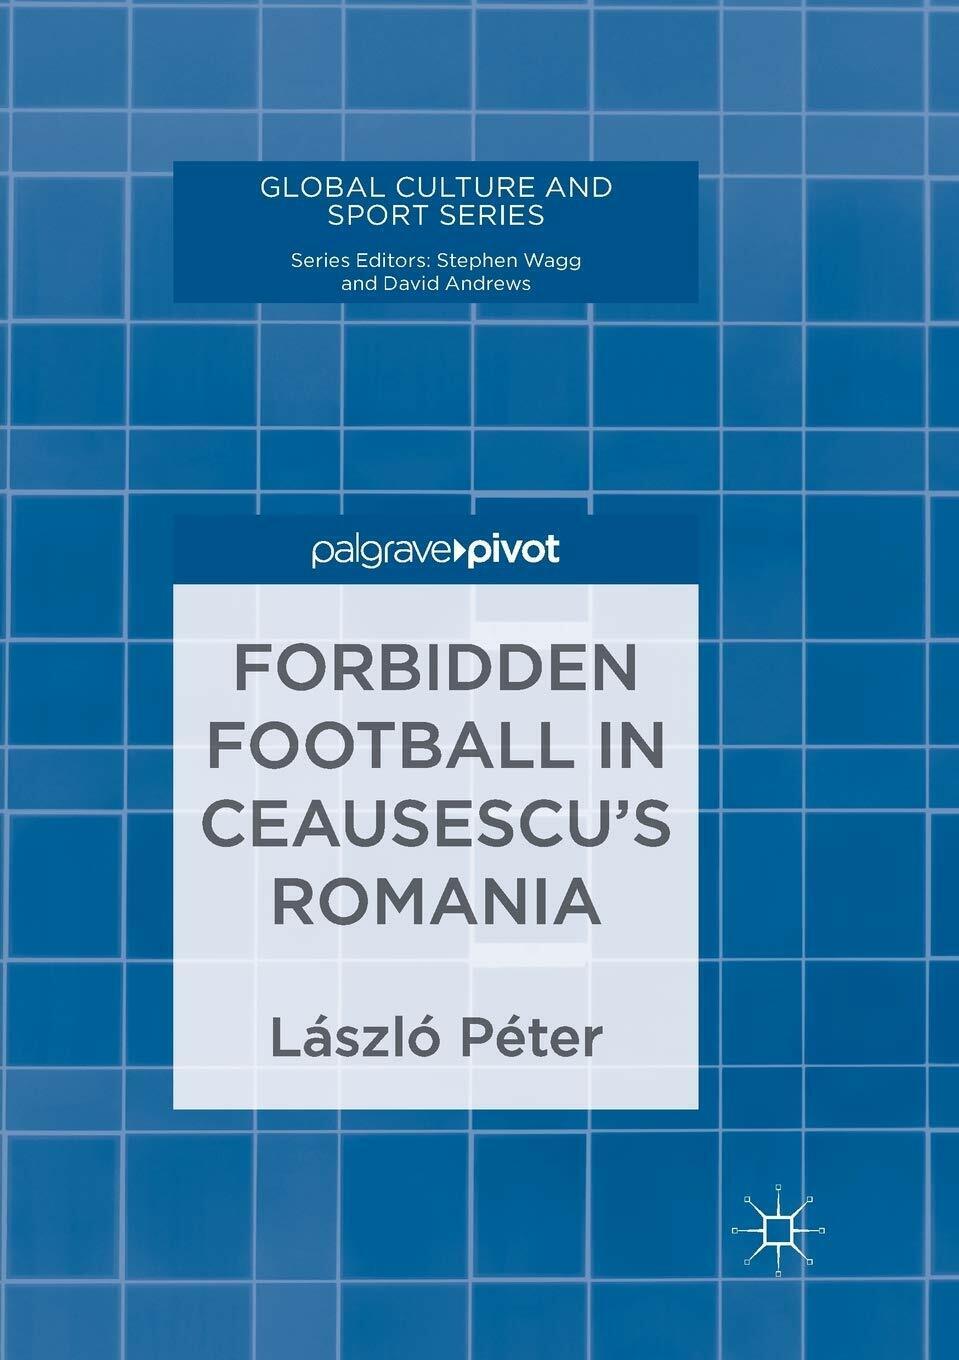 Forbidden Football in Ceausescu?s Romania - L?szl? P?ter - Springer, 2019